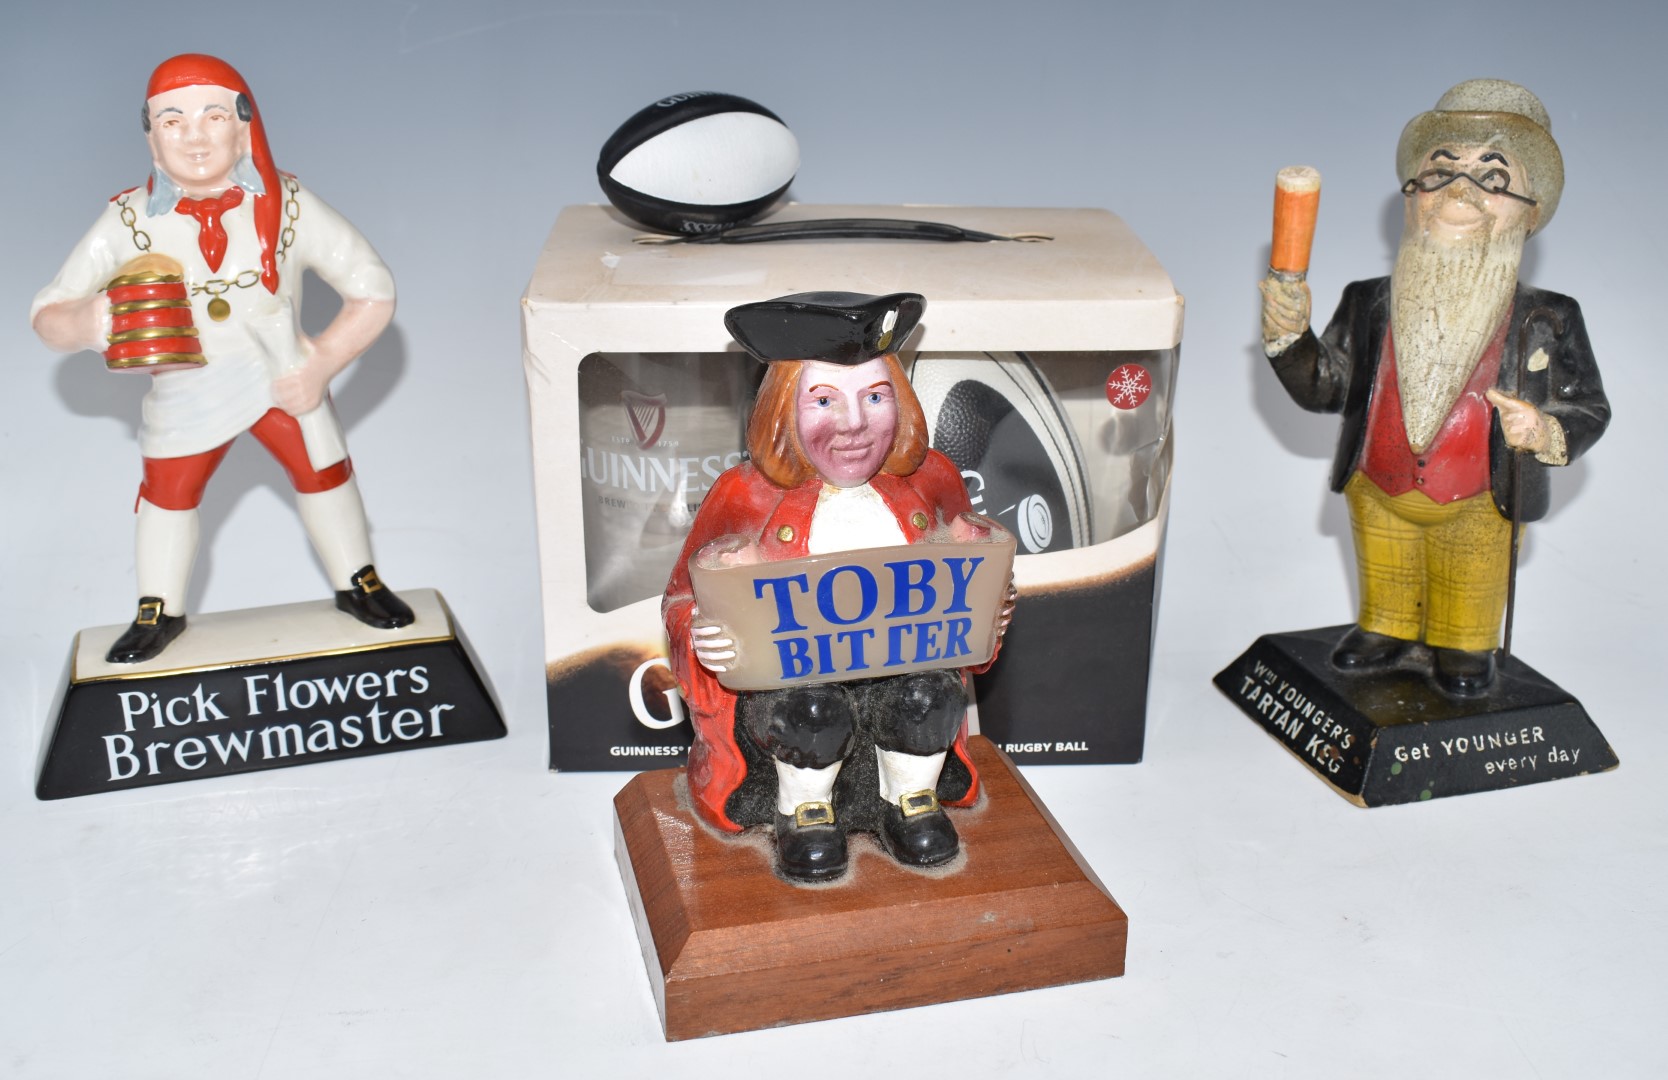 Brewery related advertising items and figures including Carltonware, Toby, Younger's, Guinness